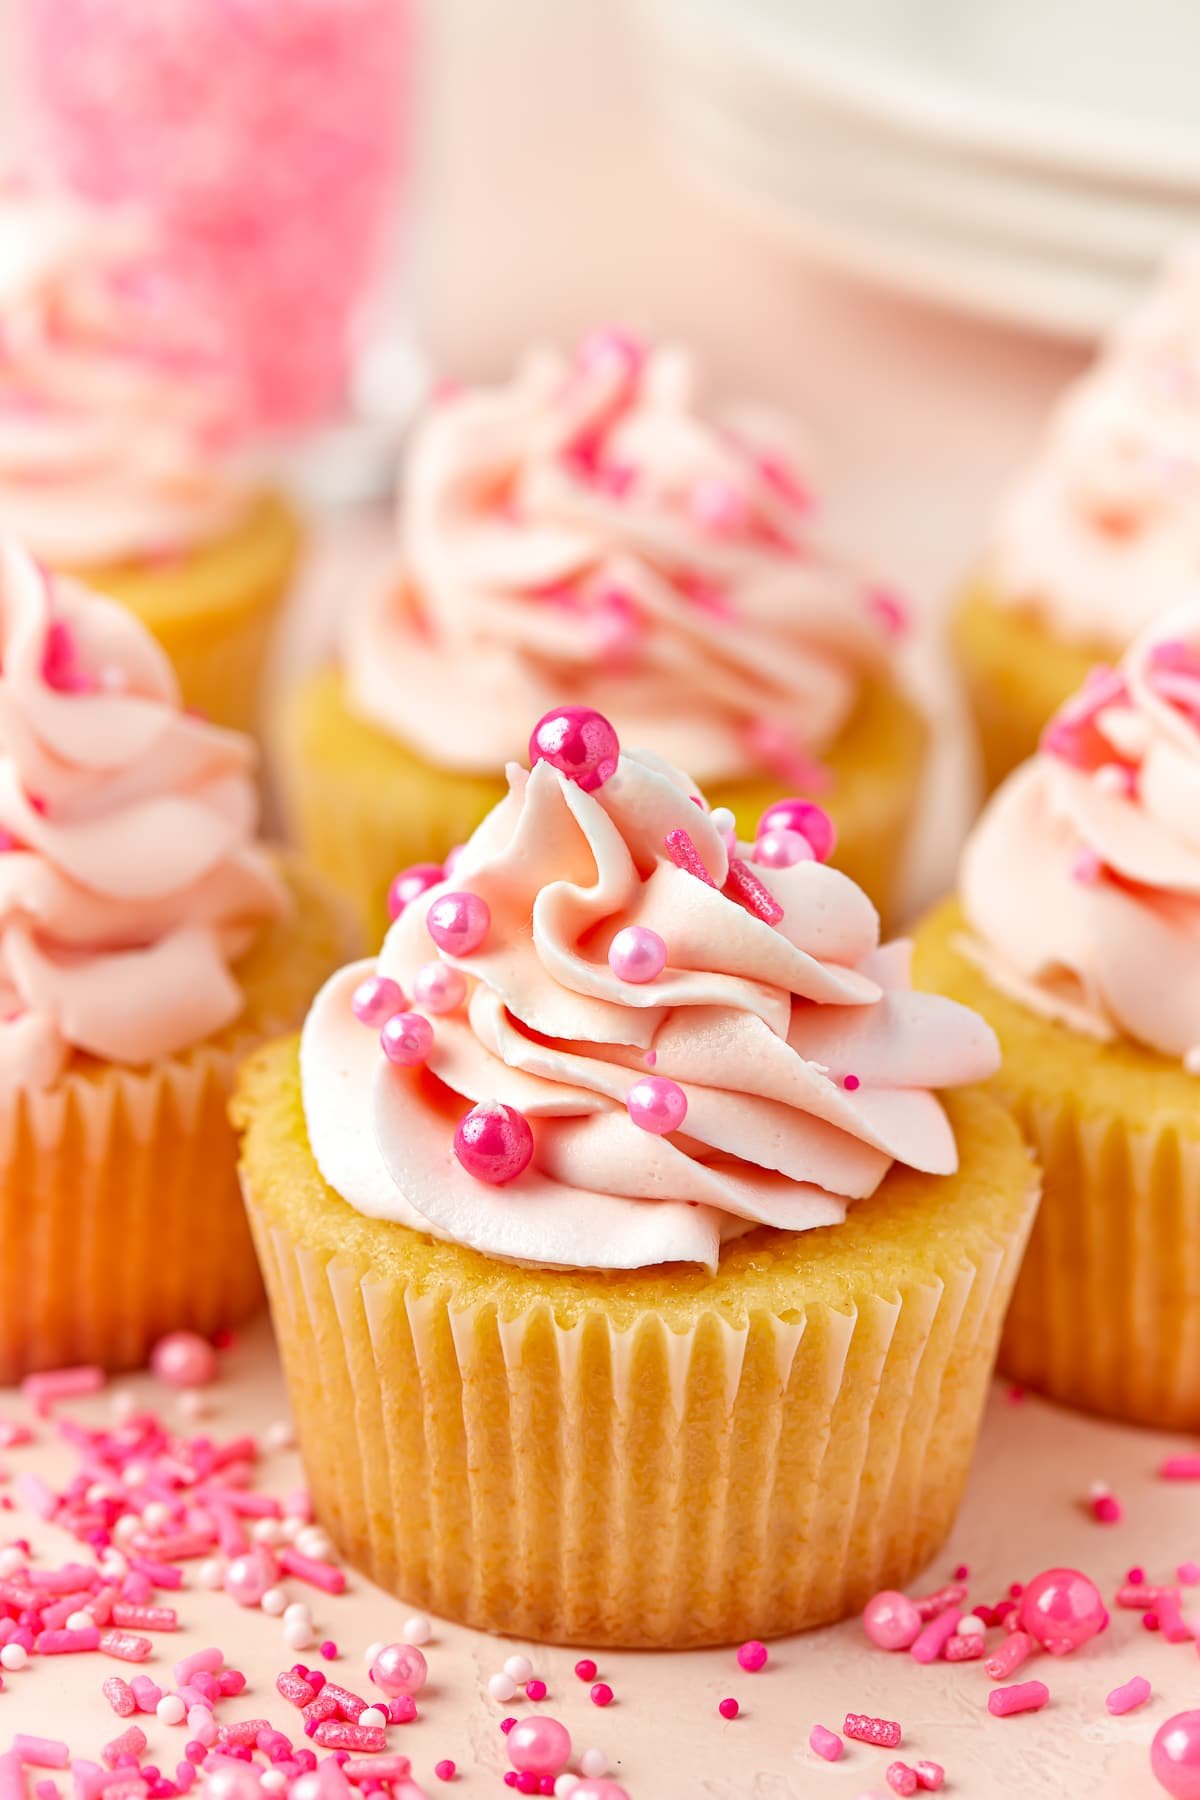 Valentine's Day Cupcakes grouped together with pink frosting and pink sprinkles, sitting on a pink tabletop